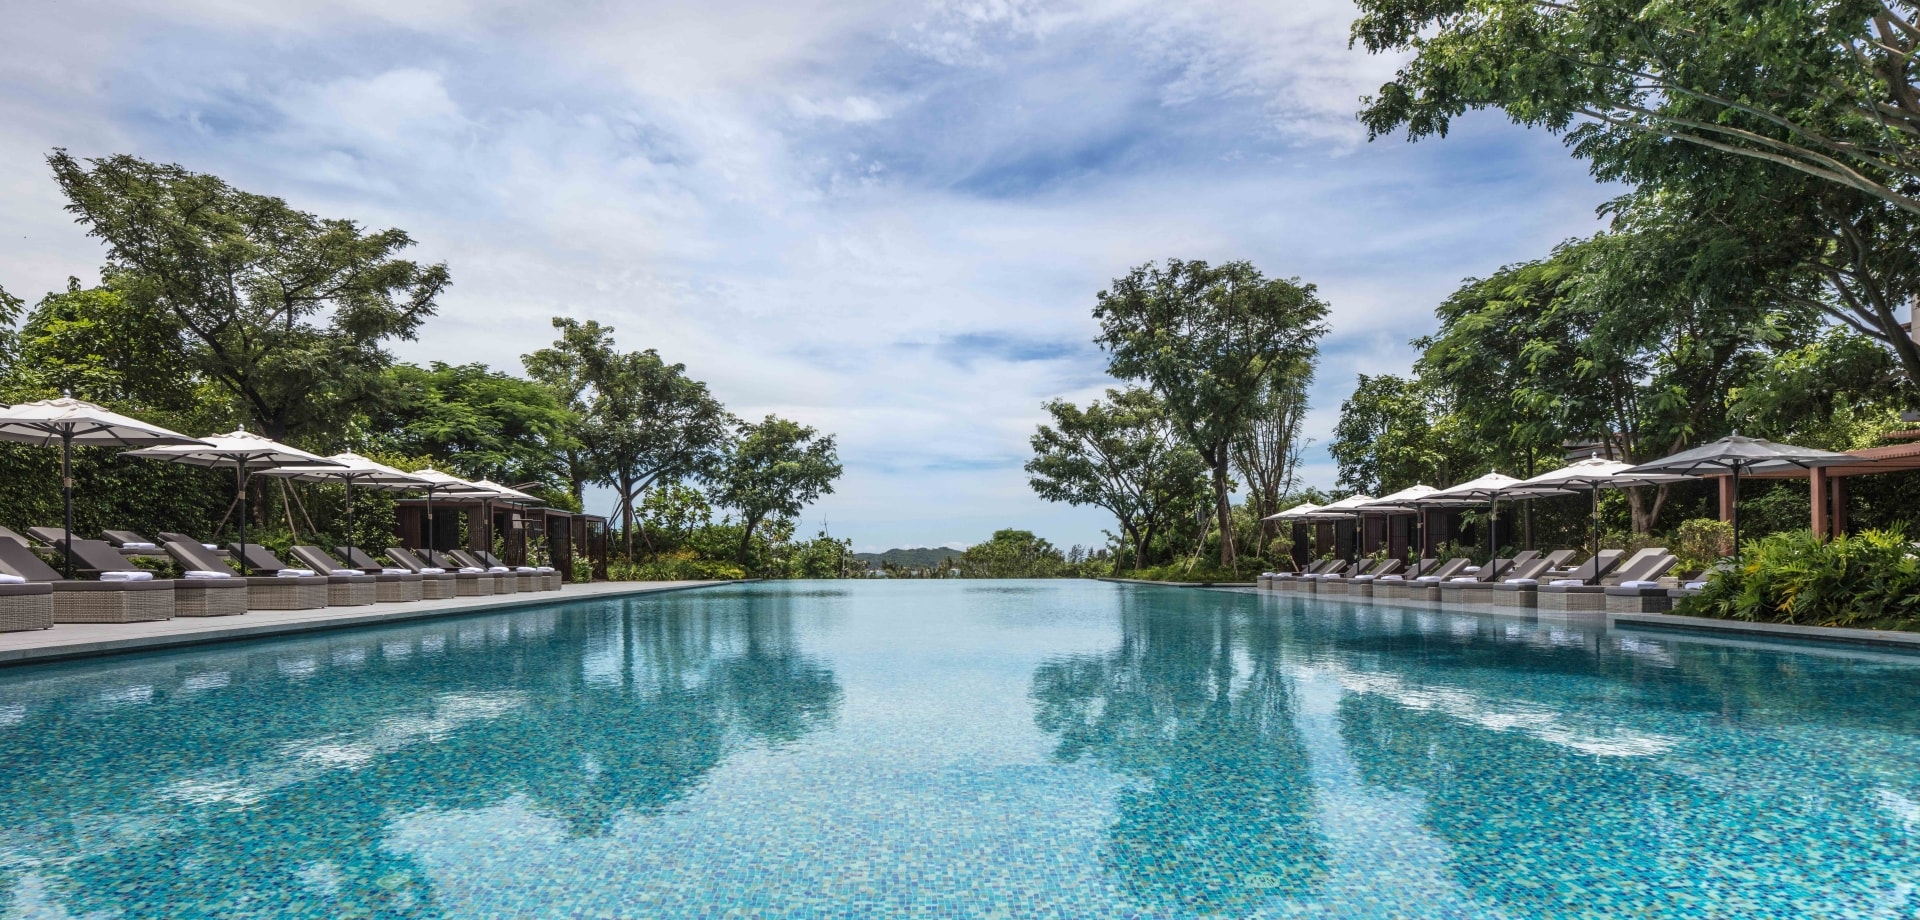 Rosewood Sanya, The First Ultra Luxury Resort of Rosewood Hotels & Resorts in Mainland China Opens